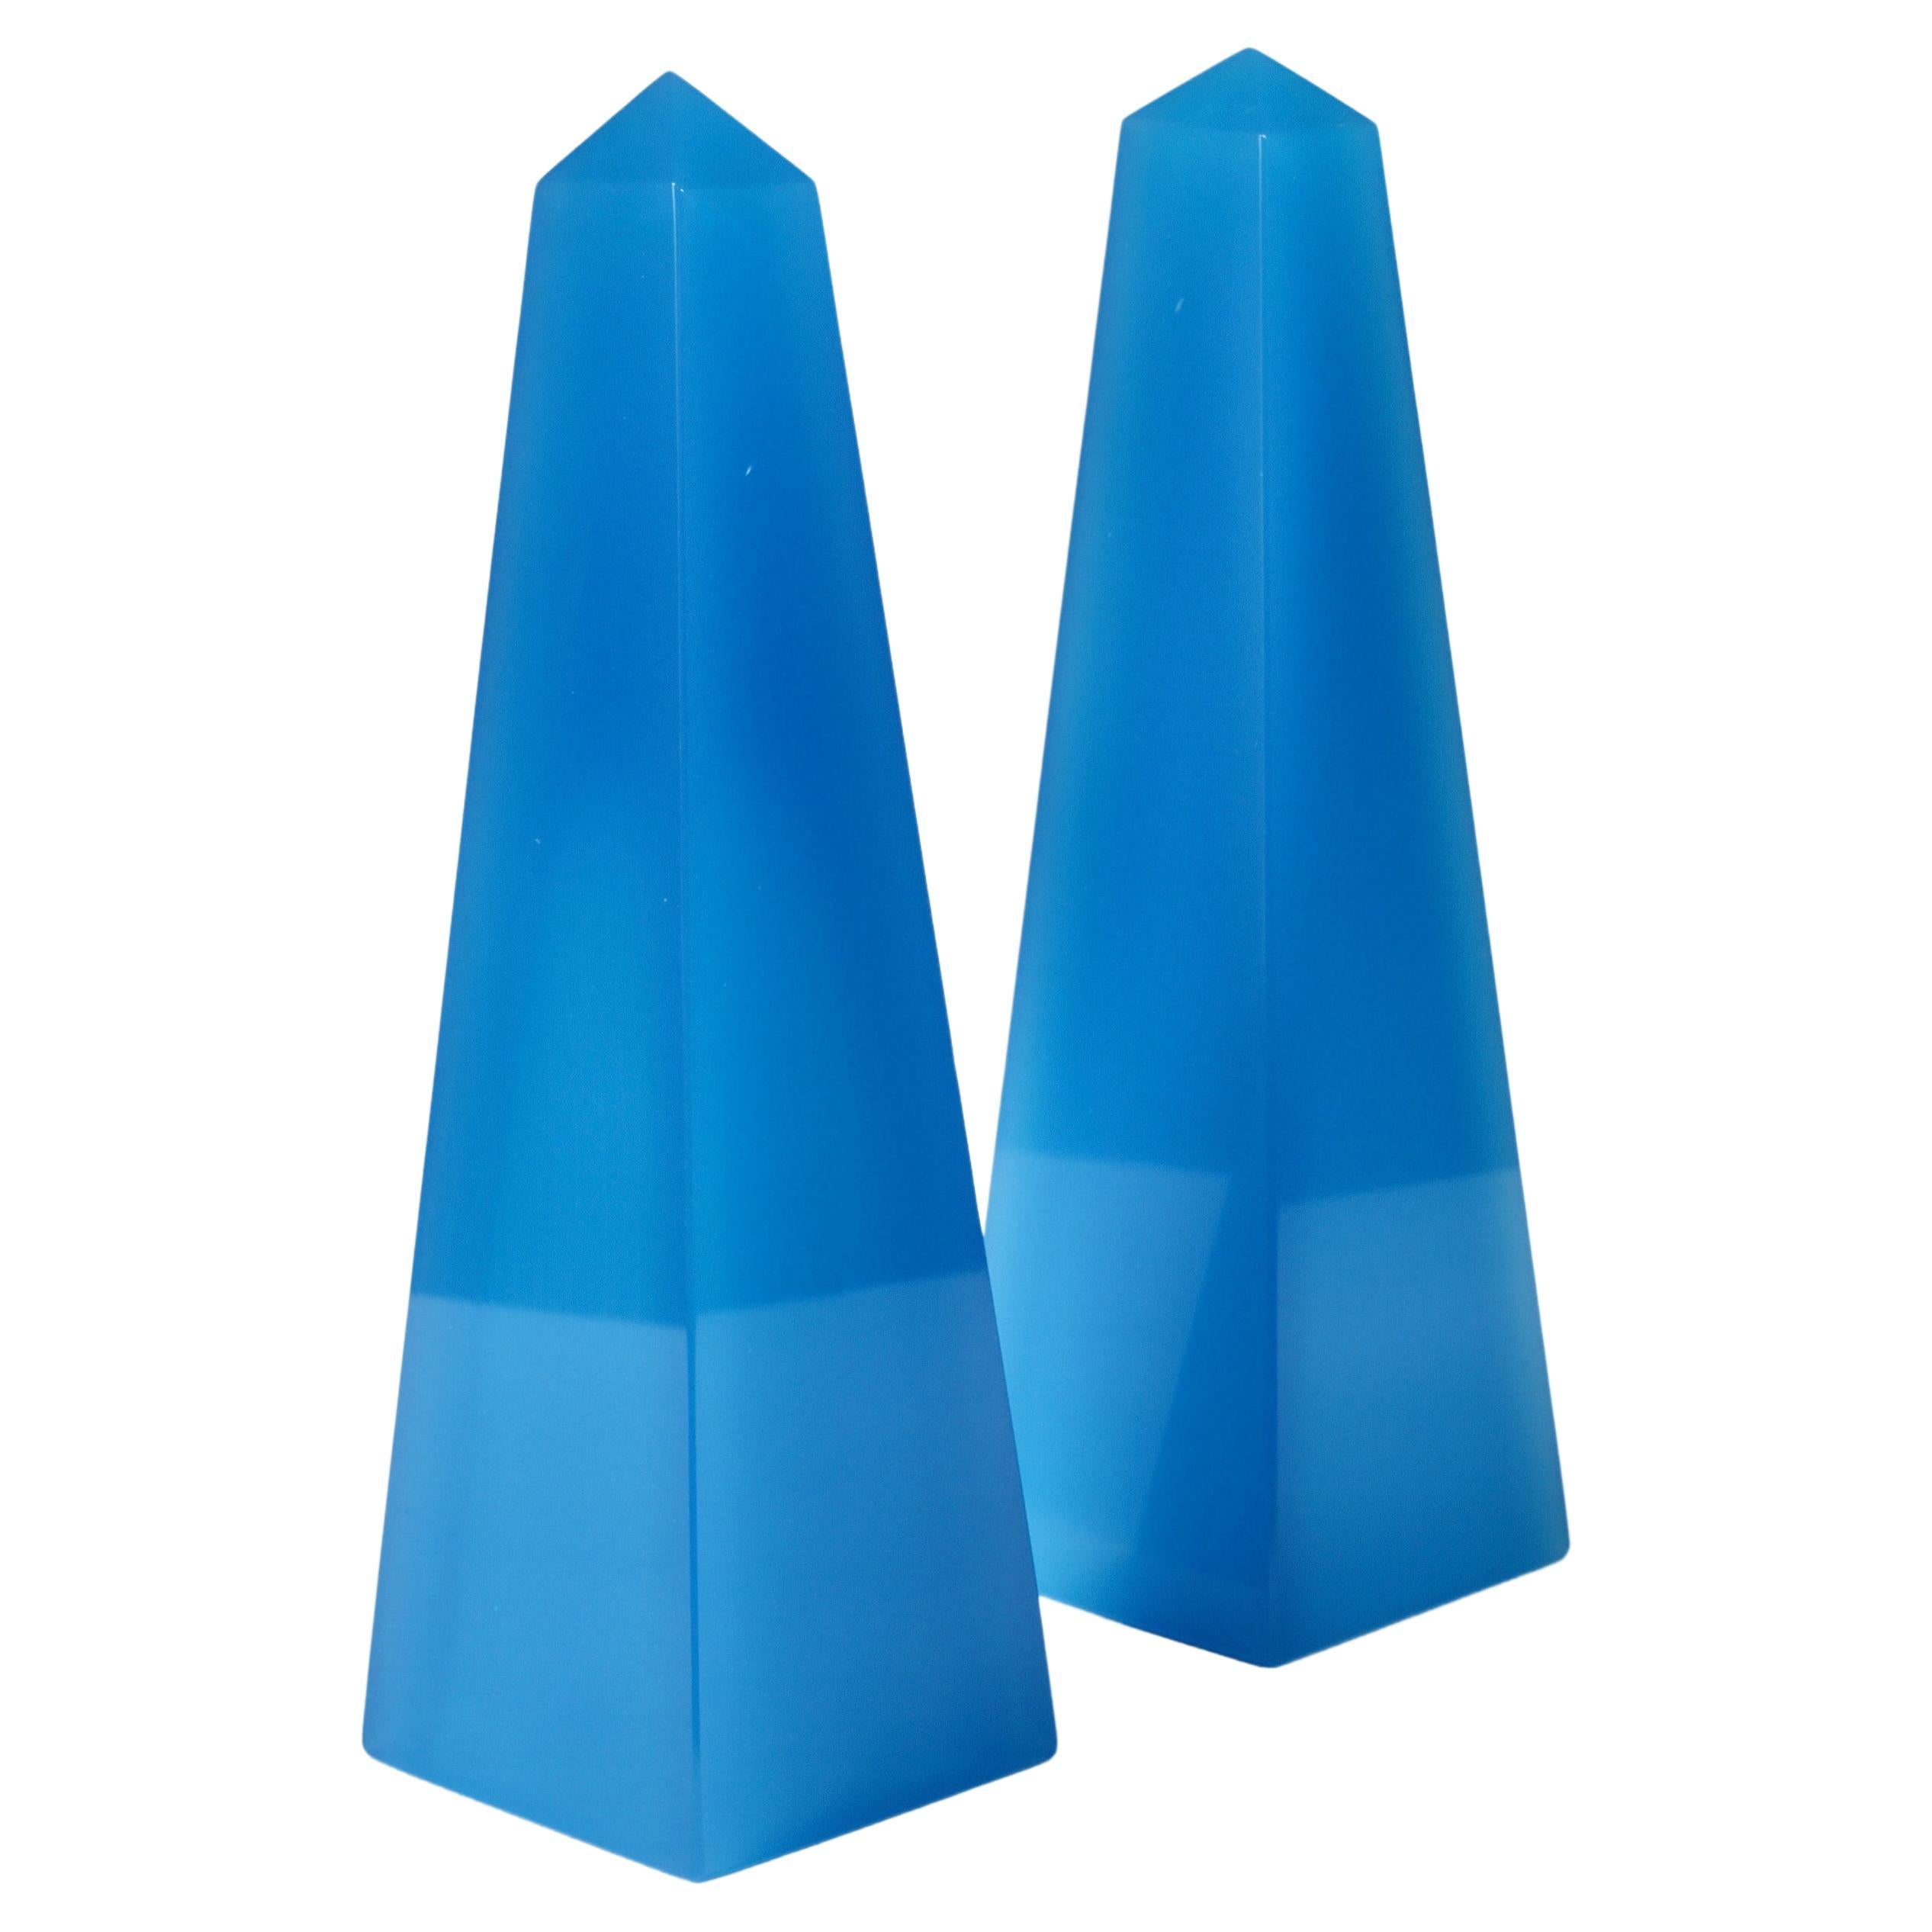 Cenedese vintage midcentury modern tall and rare pair of 'new old stock' Murano solid light blue colored / coloured faceted glass obelisks, made circa 1970. Wonderful Italian glass and perfect as an interesting and decorative paperweight or desk